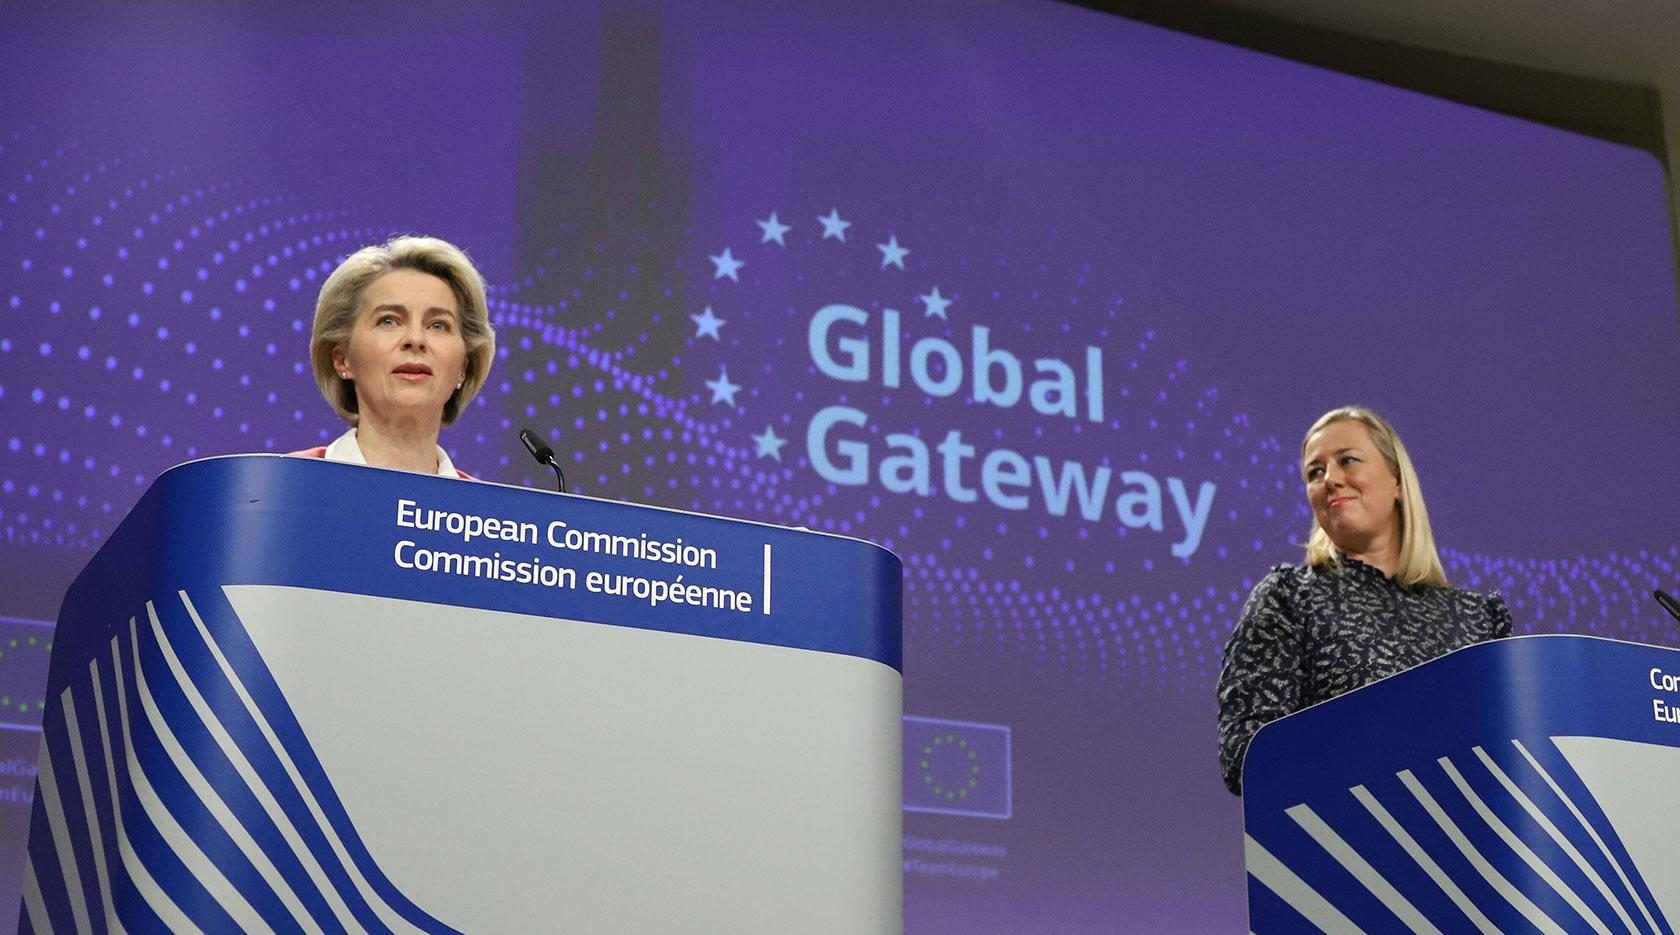 EU Counters “Belt and Road Initiative” with “Global Gateway”